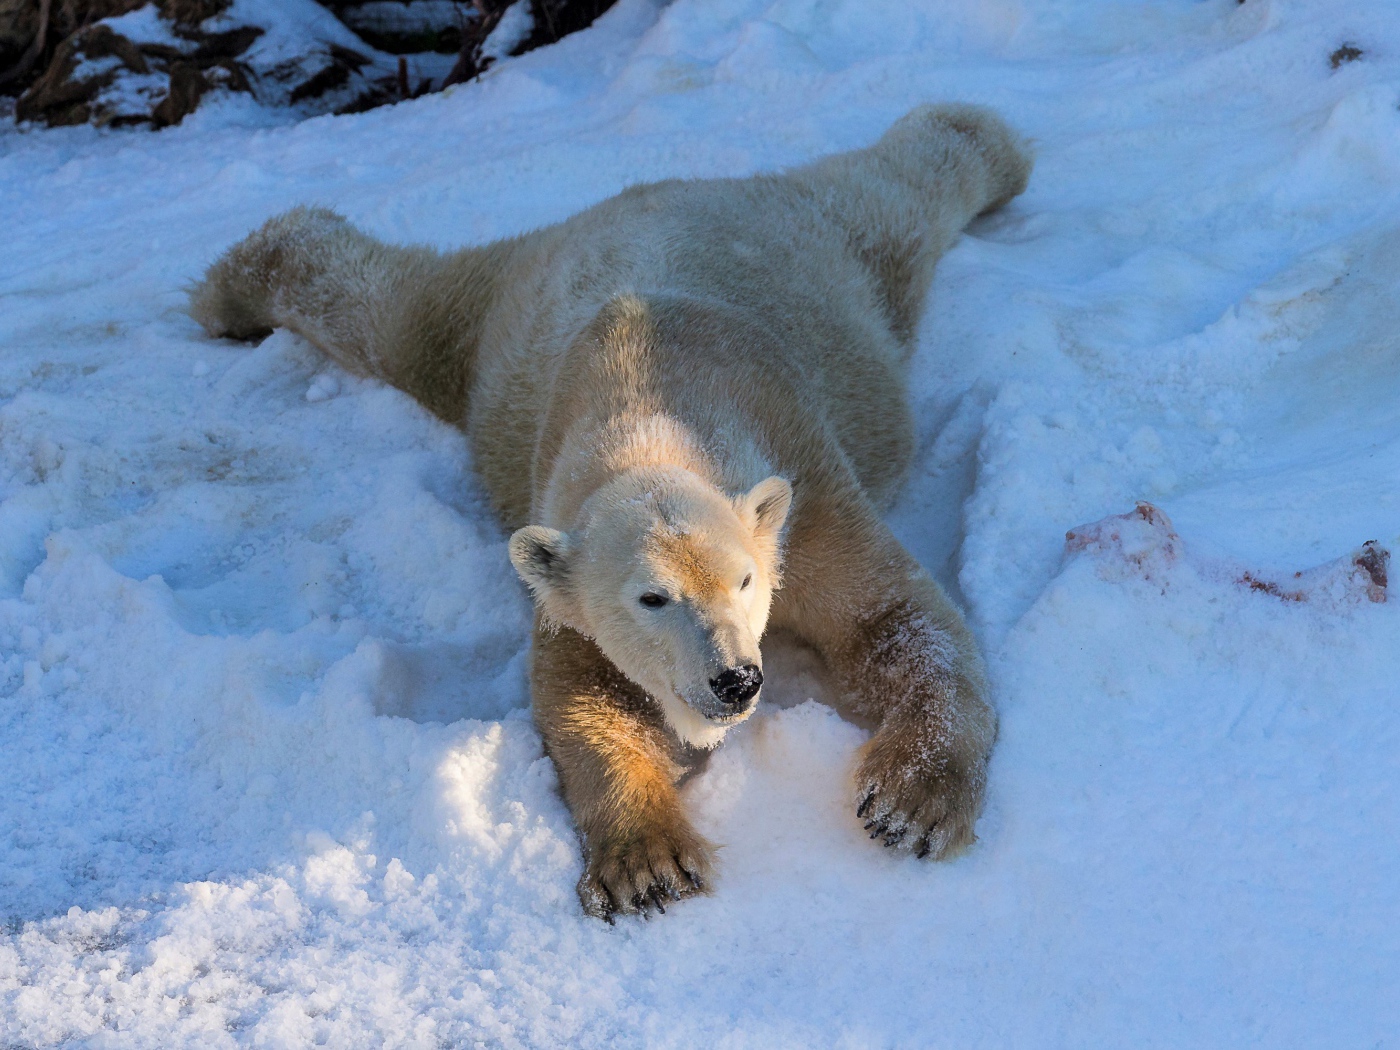 Polar bear is happy with white snow in winter